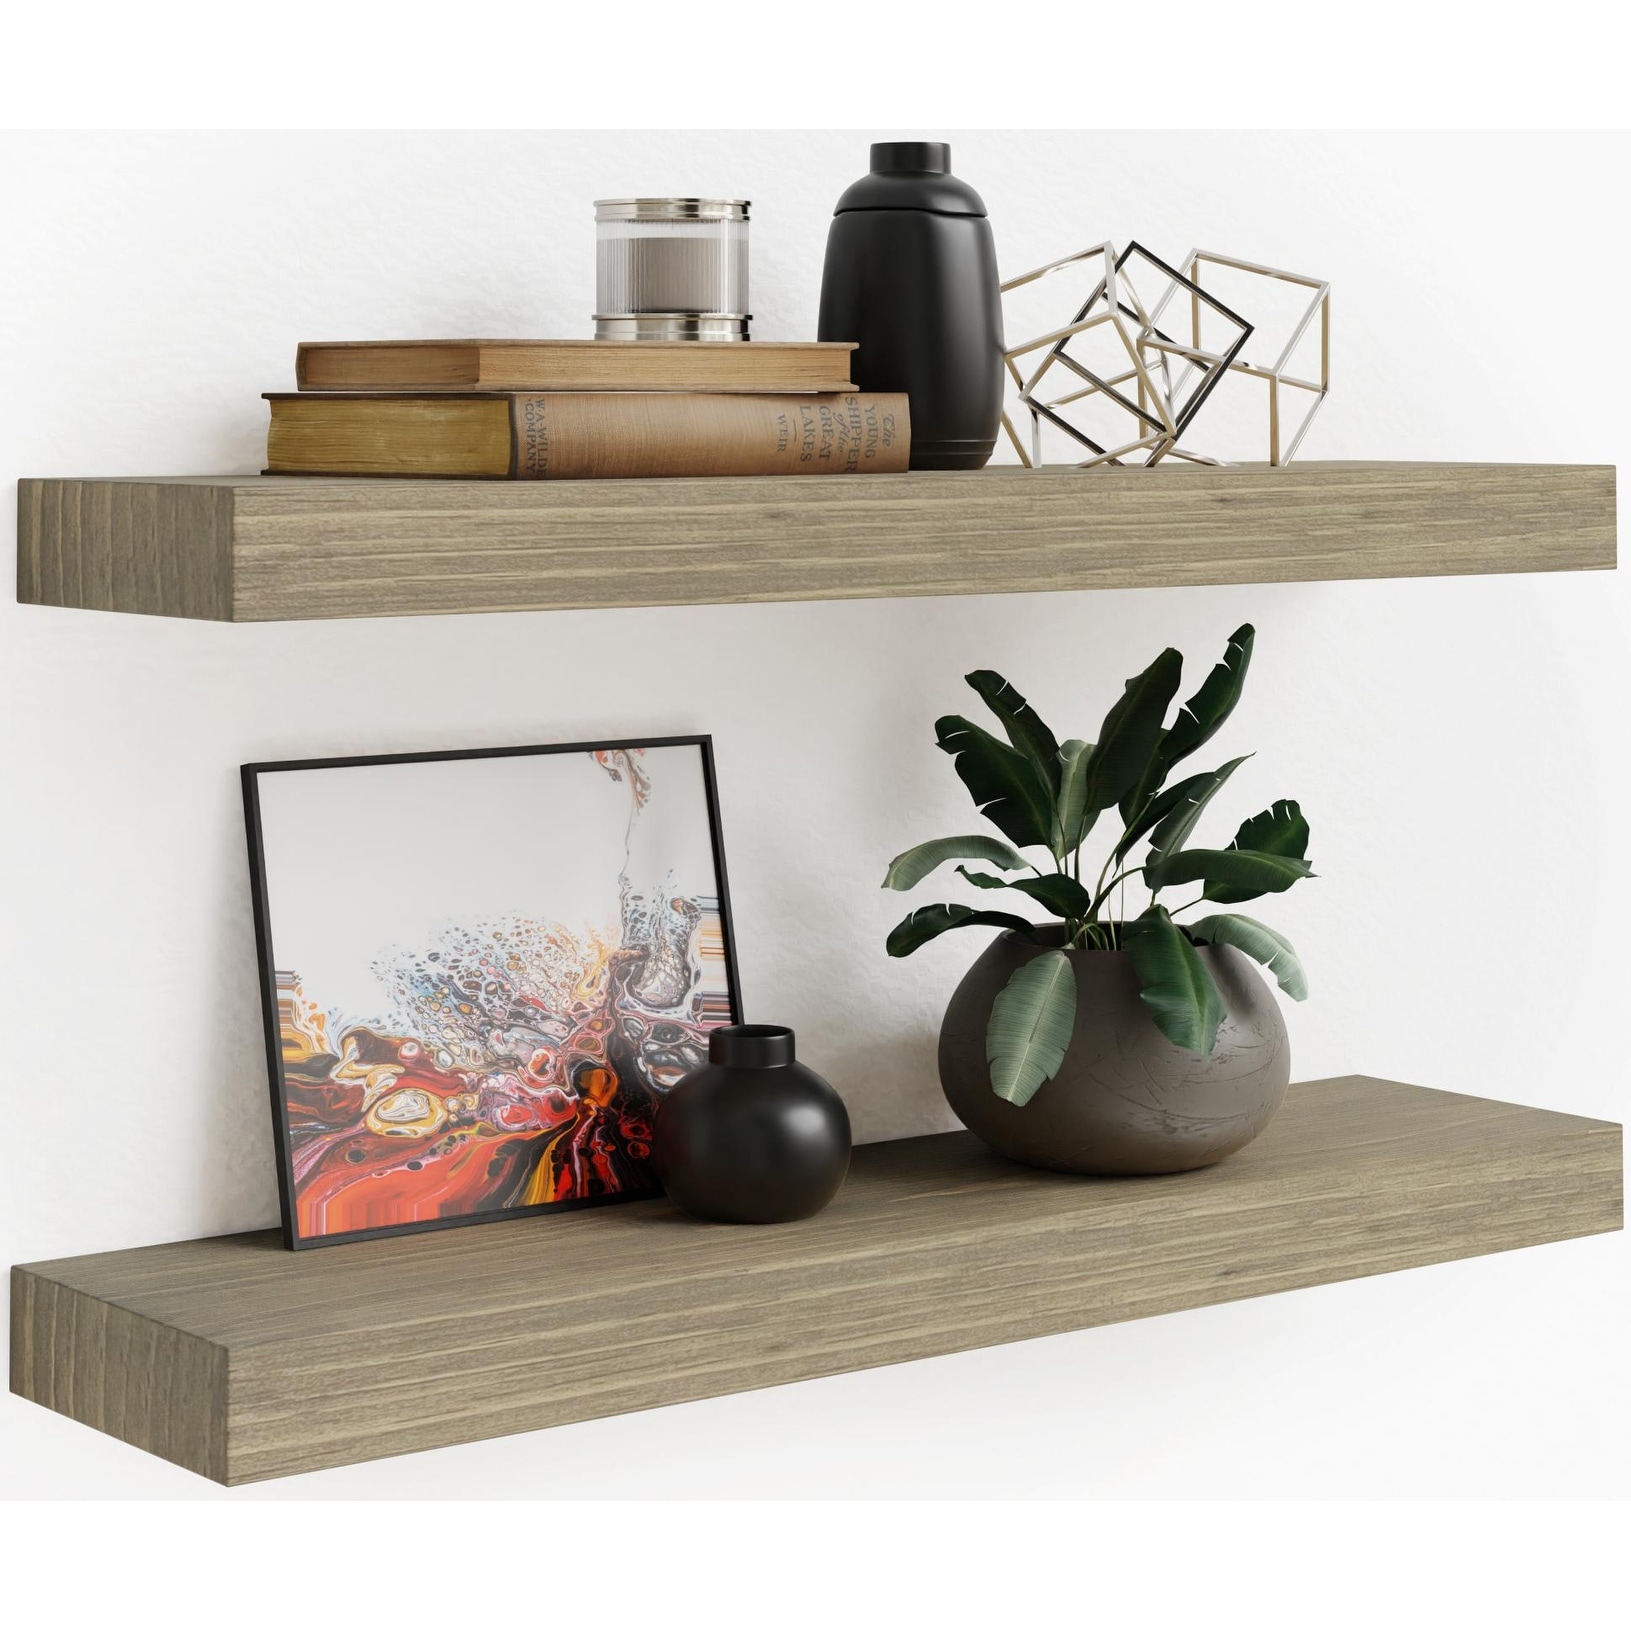 https://ak1.ostkcdn.com/images/products/is/images/direct/b679ff823ed5ee329e9462624fb0d2bbd30220a6/Rustic-Wooden-Floating-Wall-Shelves-%28Set-of-2%29.jpg